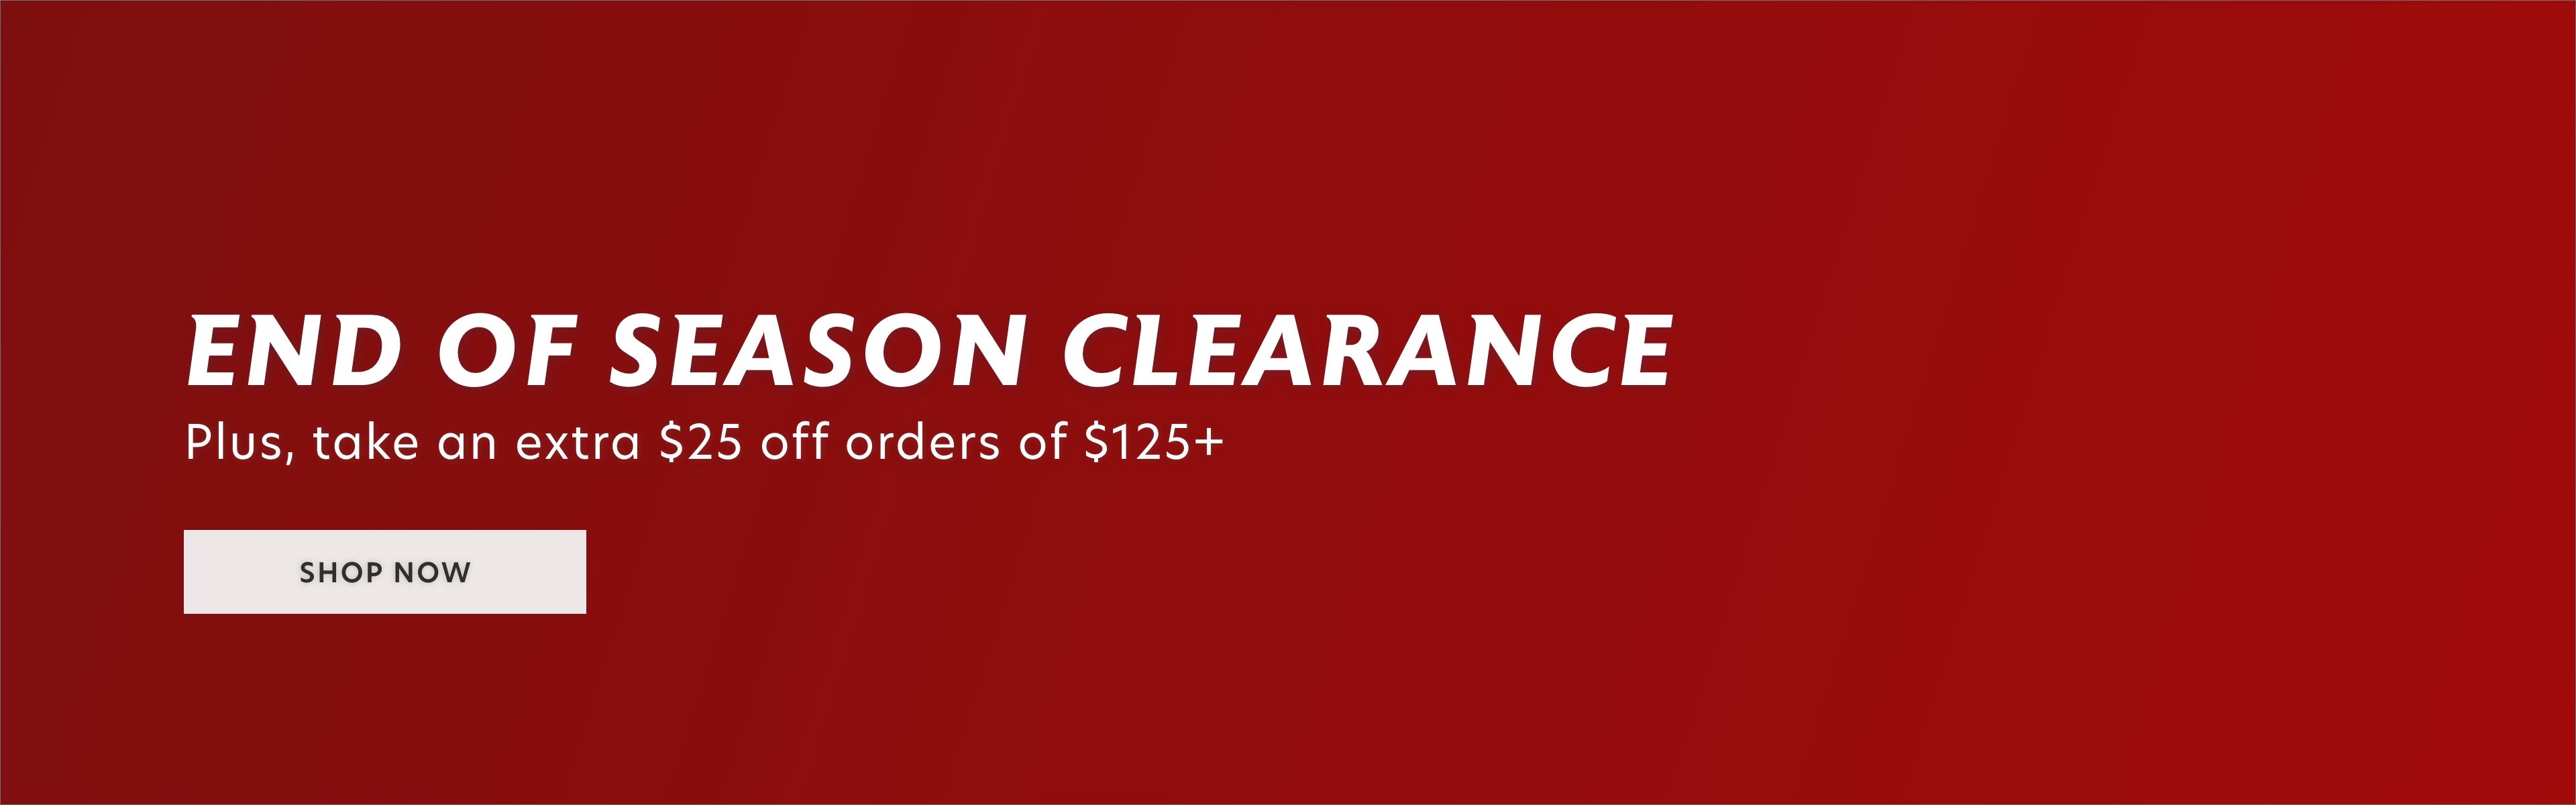 End of Season Clearance, plus take an extra $25 off orders of $125+